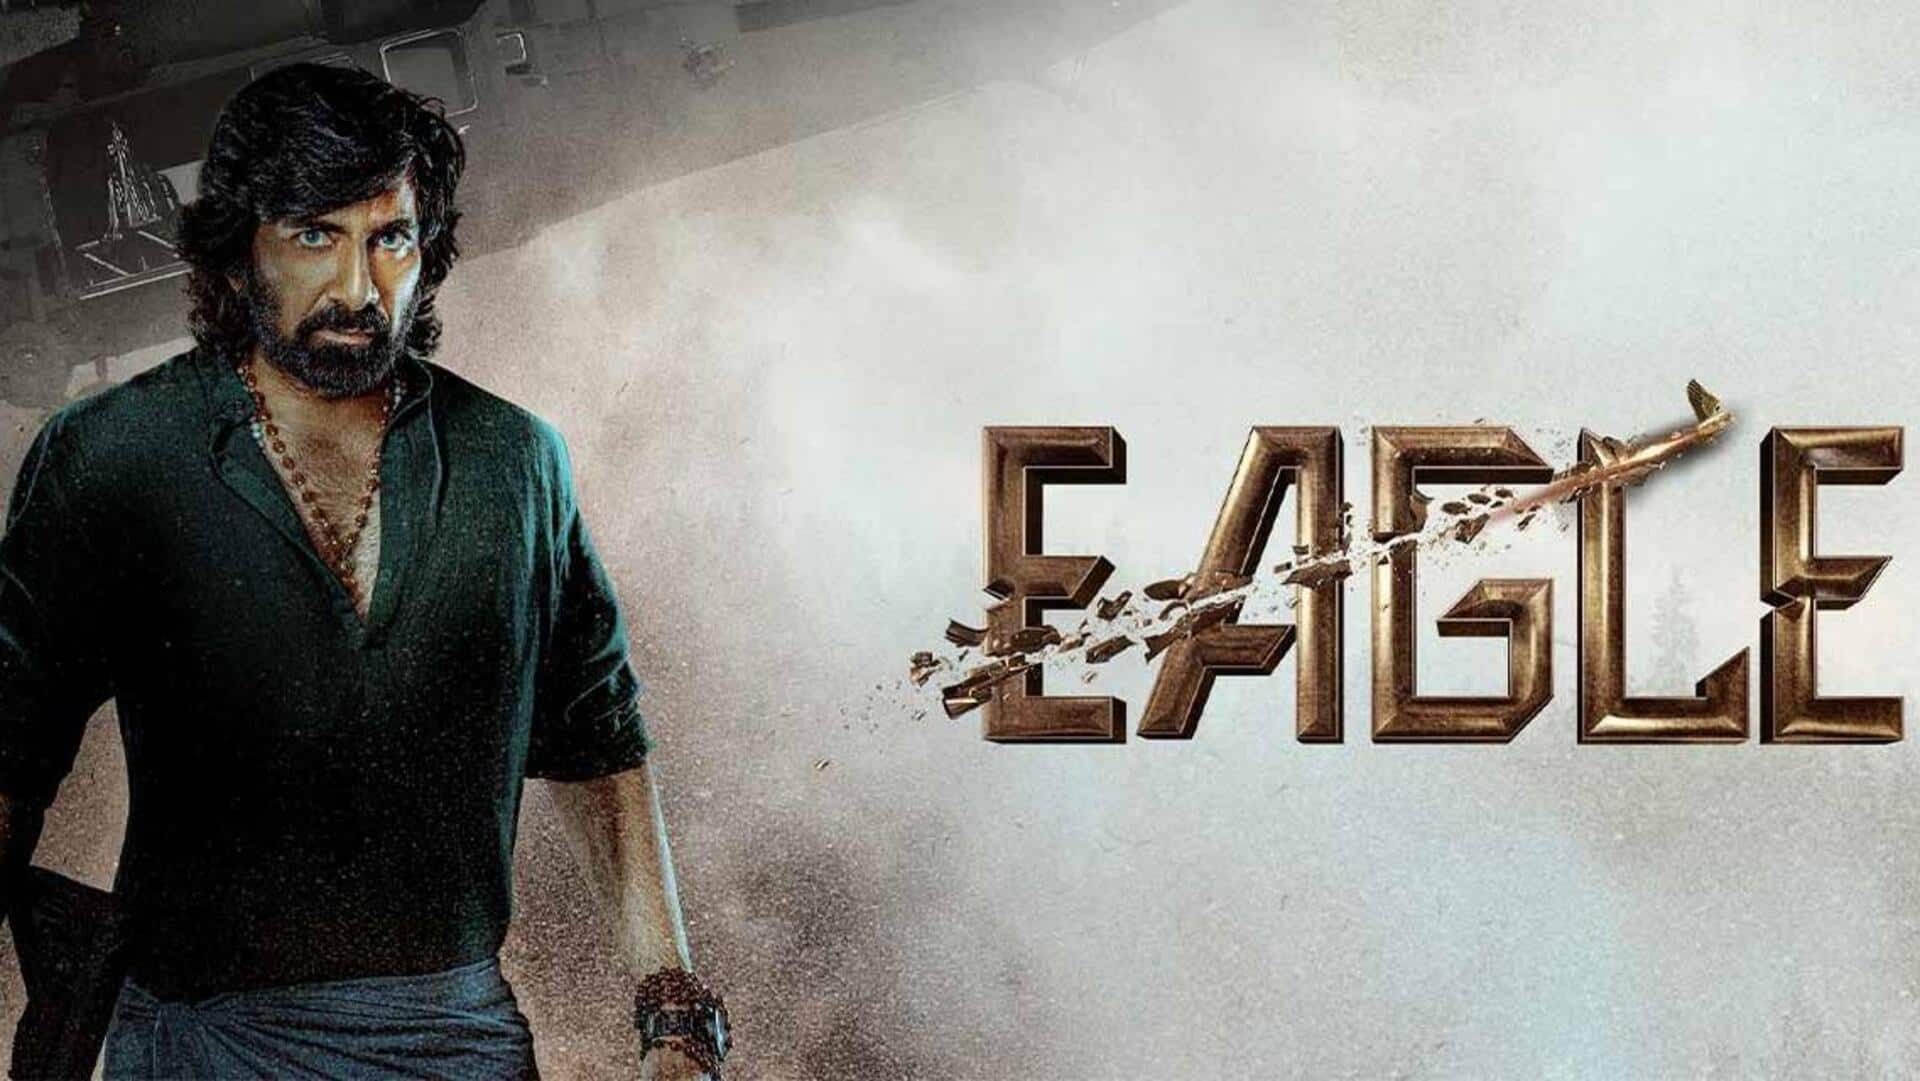 Box office collection: 'Eagle' eyes to accelerate over weekend